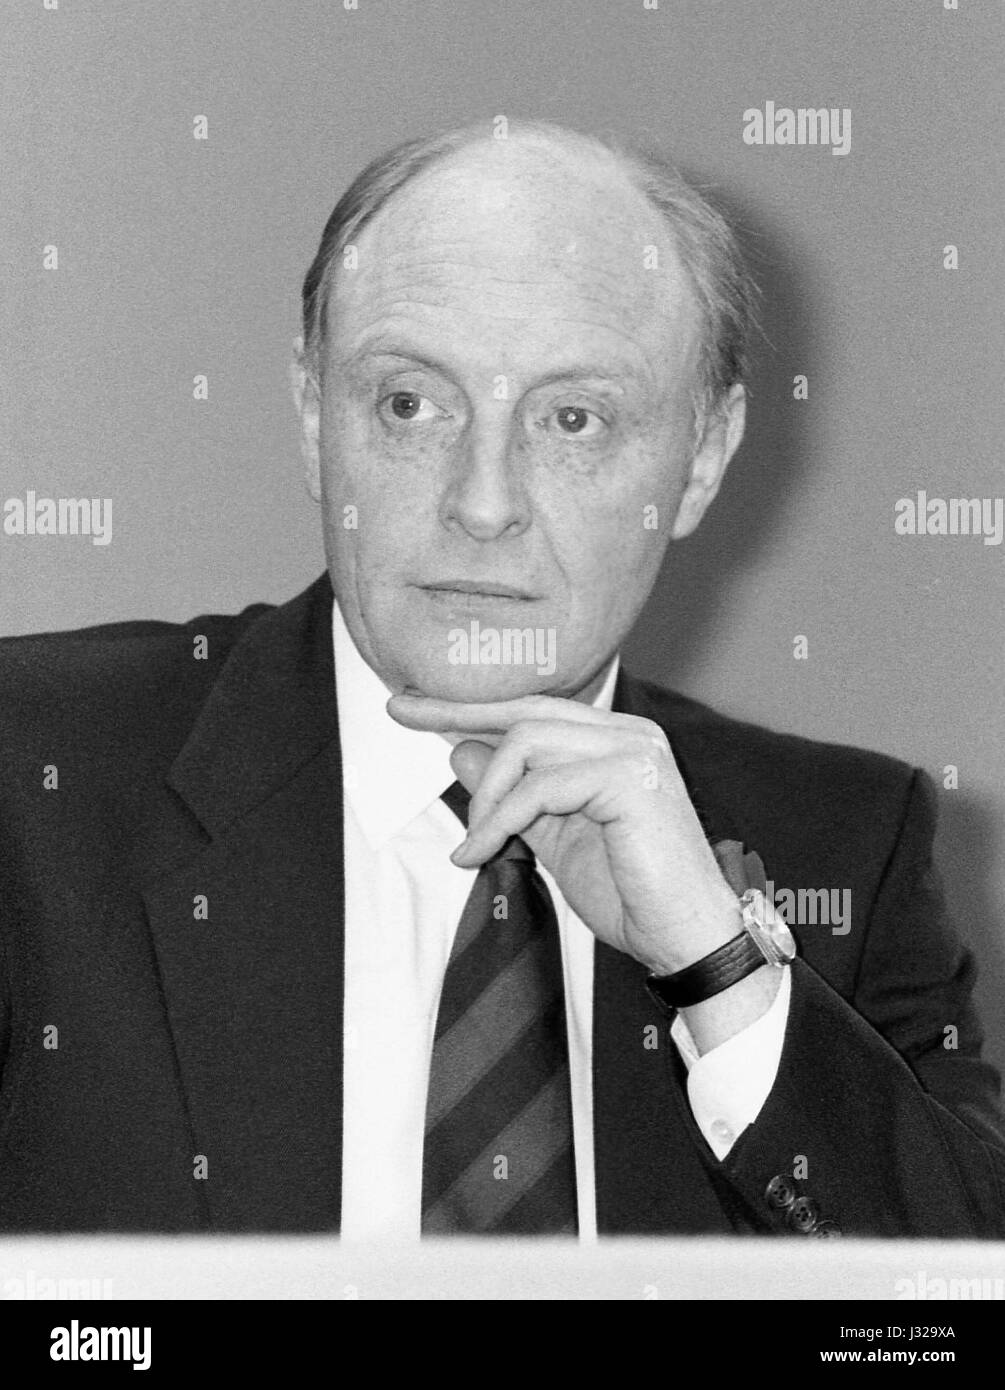 Rt. Hon. Neil Kinnock, Leader of the Labour party, attends a party press conference in London, England on January 29, 1990. Stock Photo